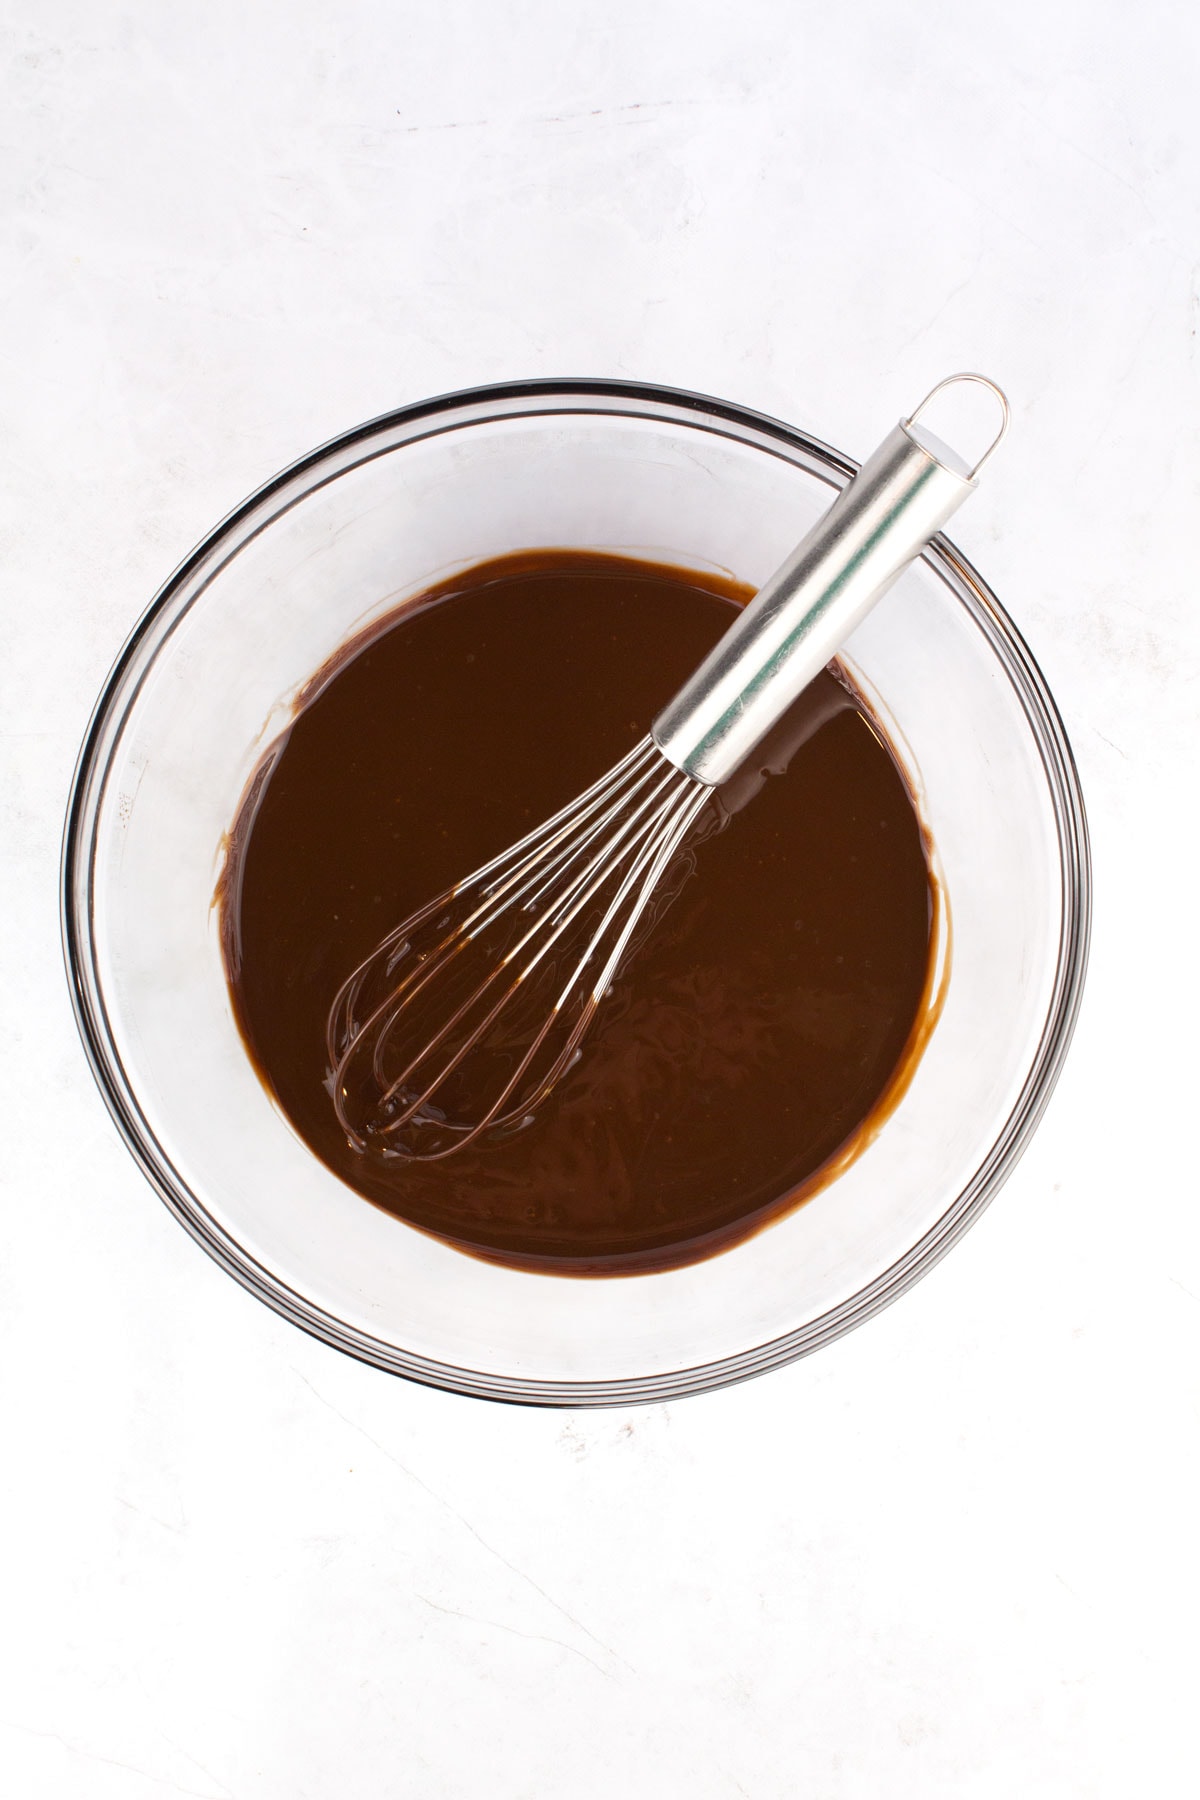 Chocolate mixture whisked together in a bowl.